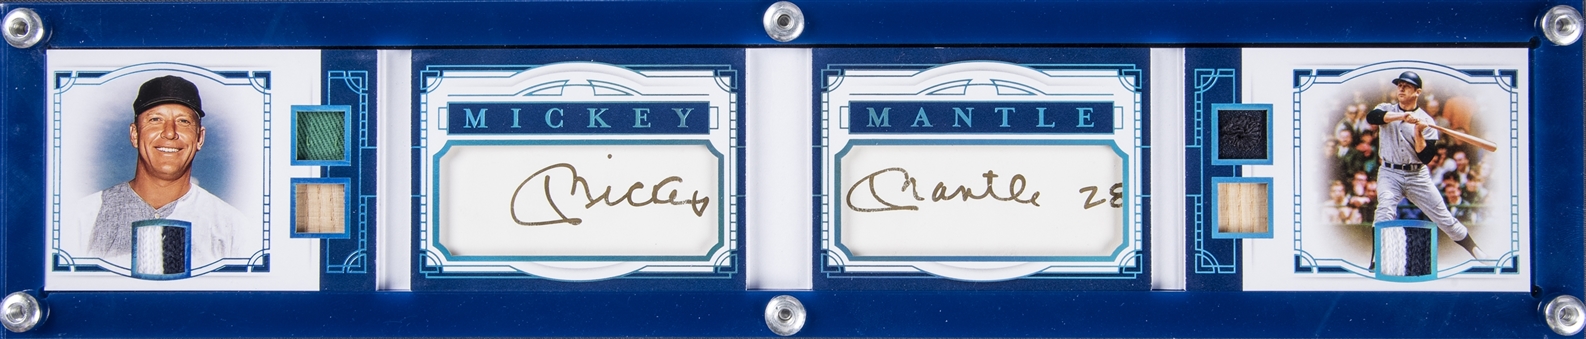 2020 National Treasures #1 Mickey Mantle Signed Bat Jersey Patch Relic Booklet Card (#1/1) 